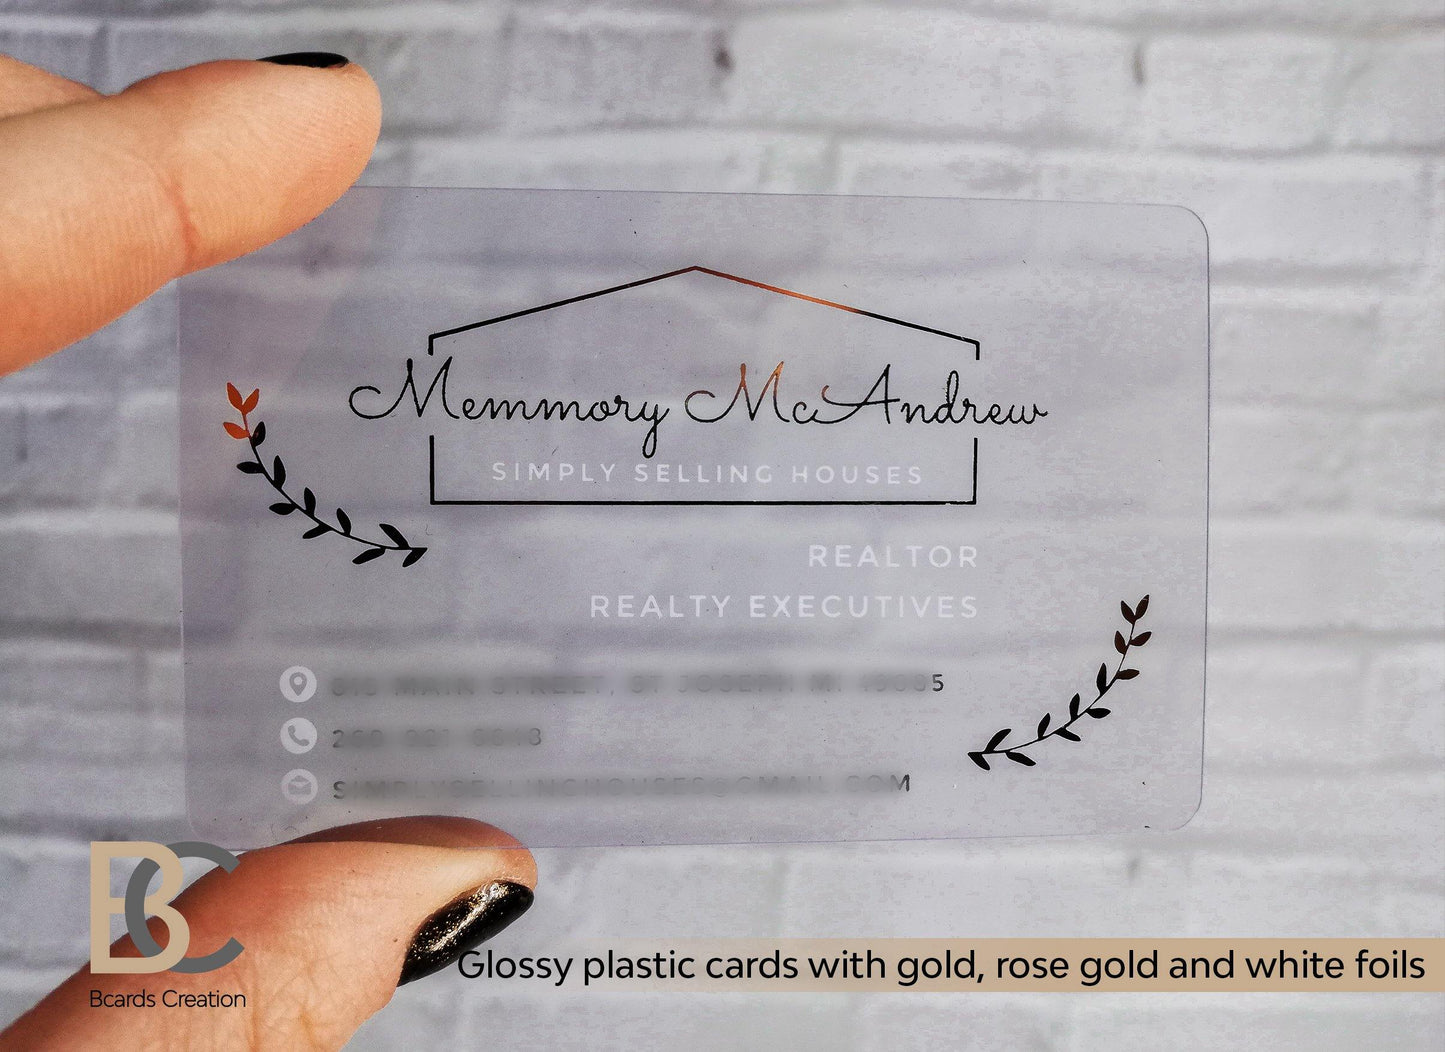 Glossy Plastic Cards | Gold, Rose Gold, White Foils | Clear Business Cards - BcardsCreation